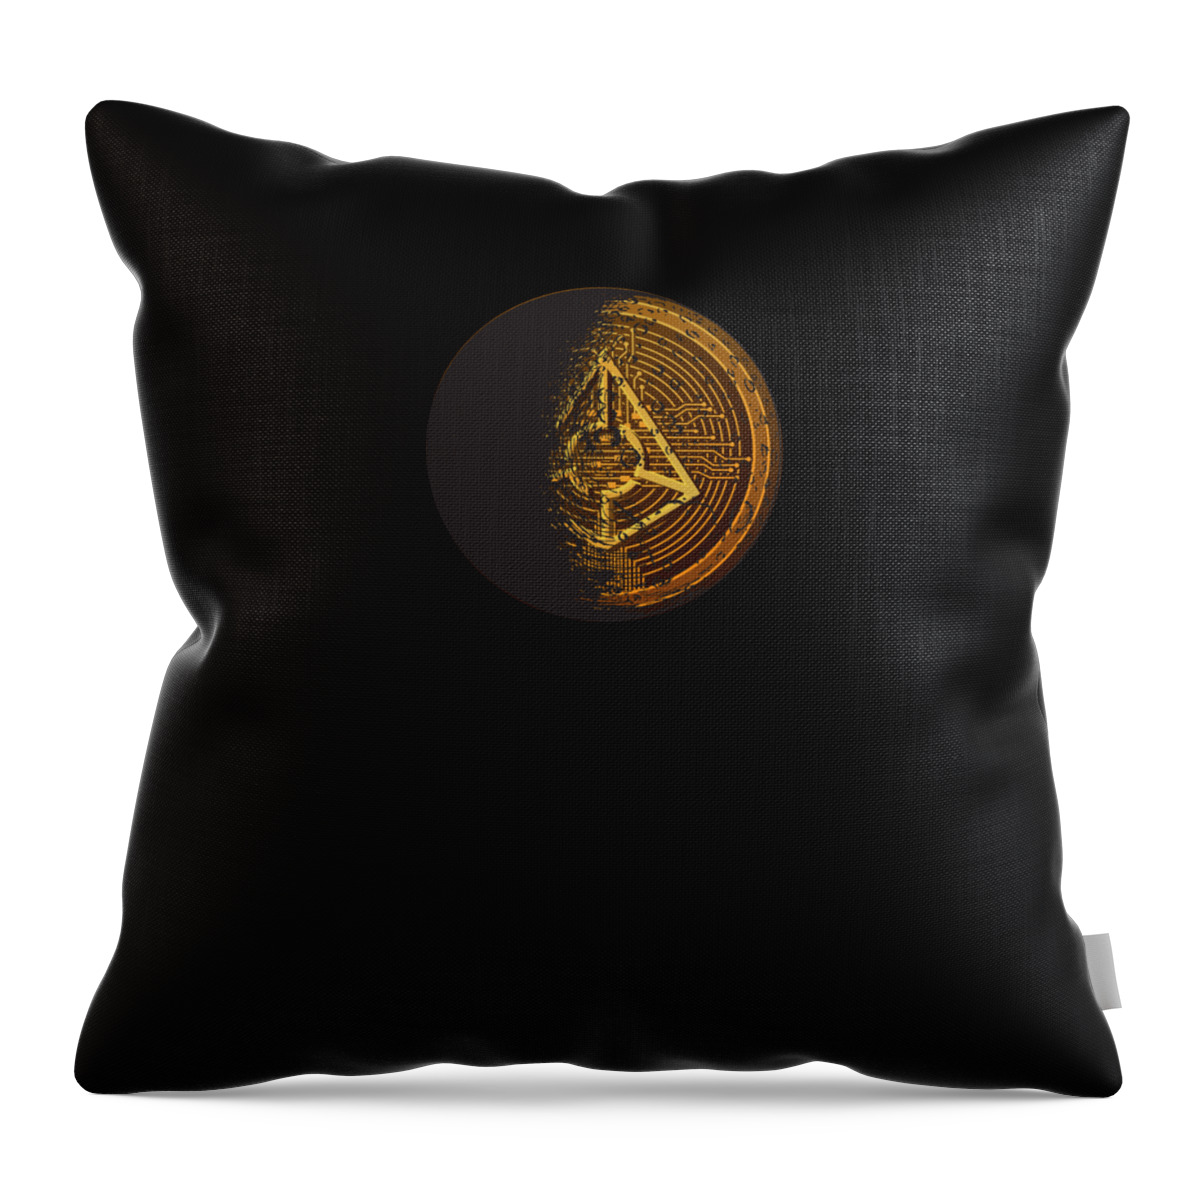 Augur Throw Pillow featuring the digital art Augur Moon Cryptocurrency by Me